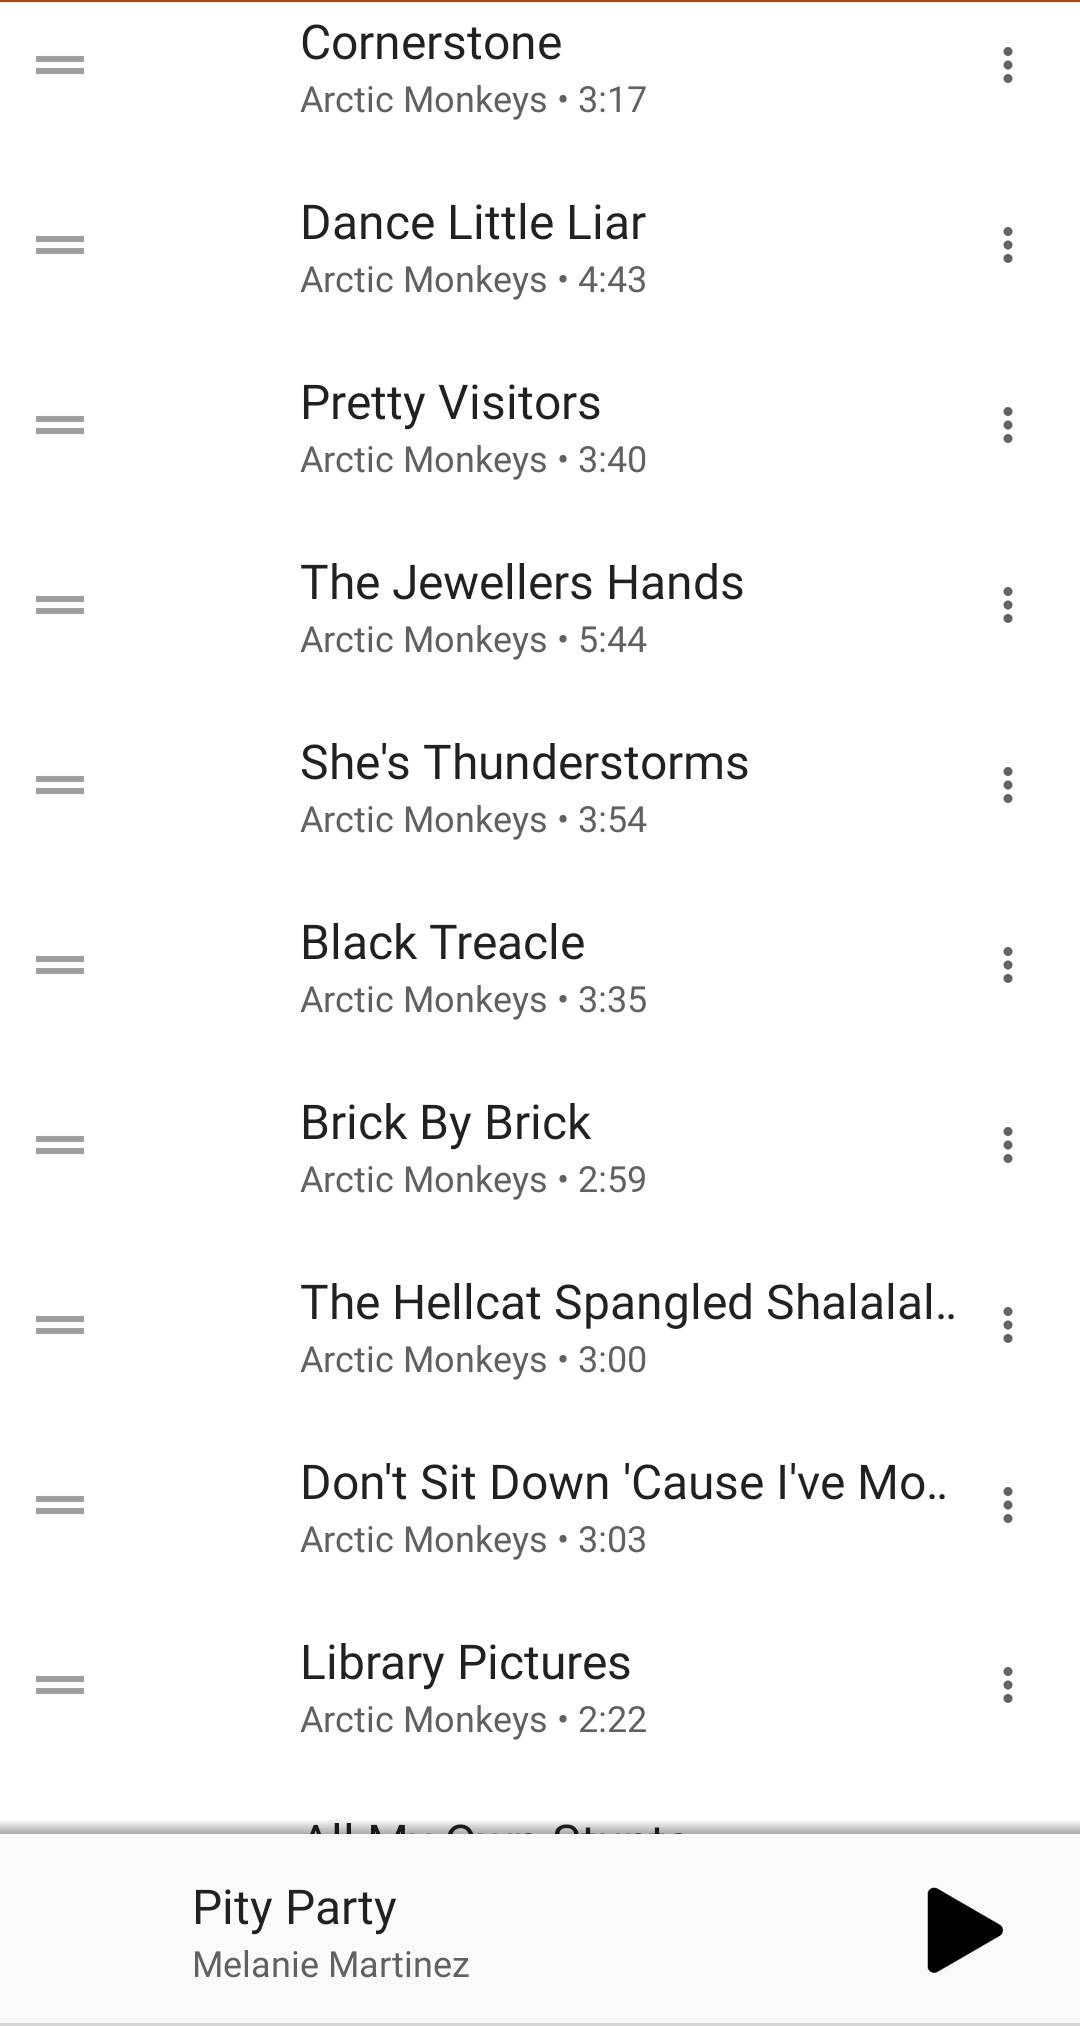 google music download all